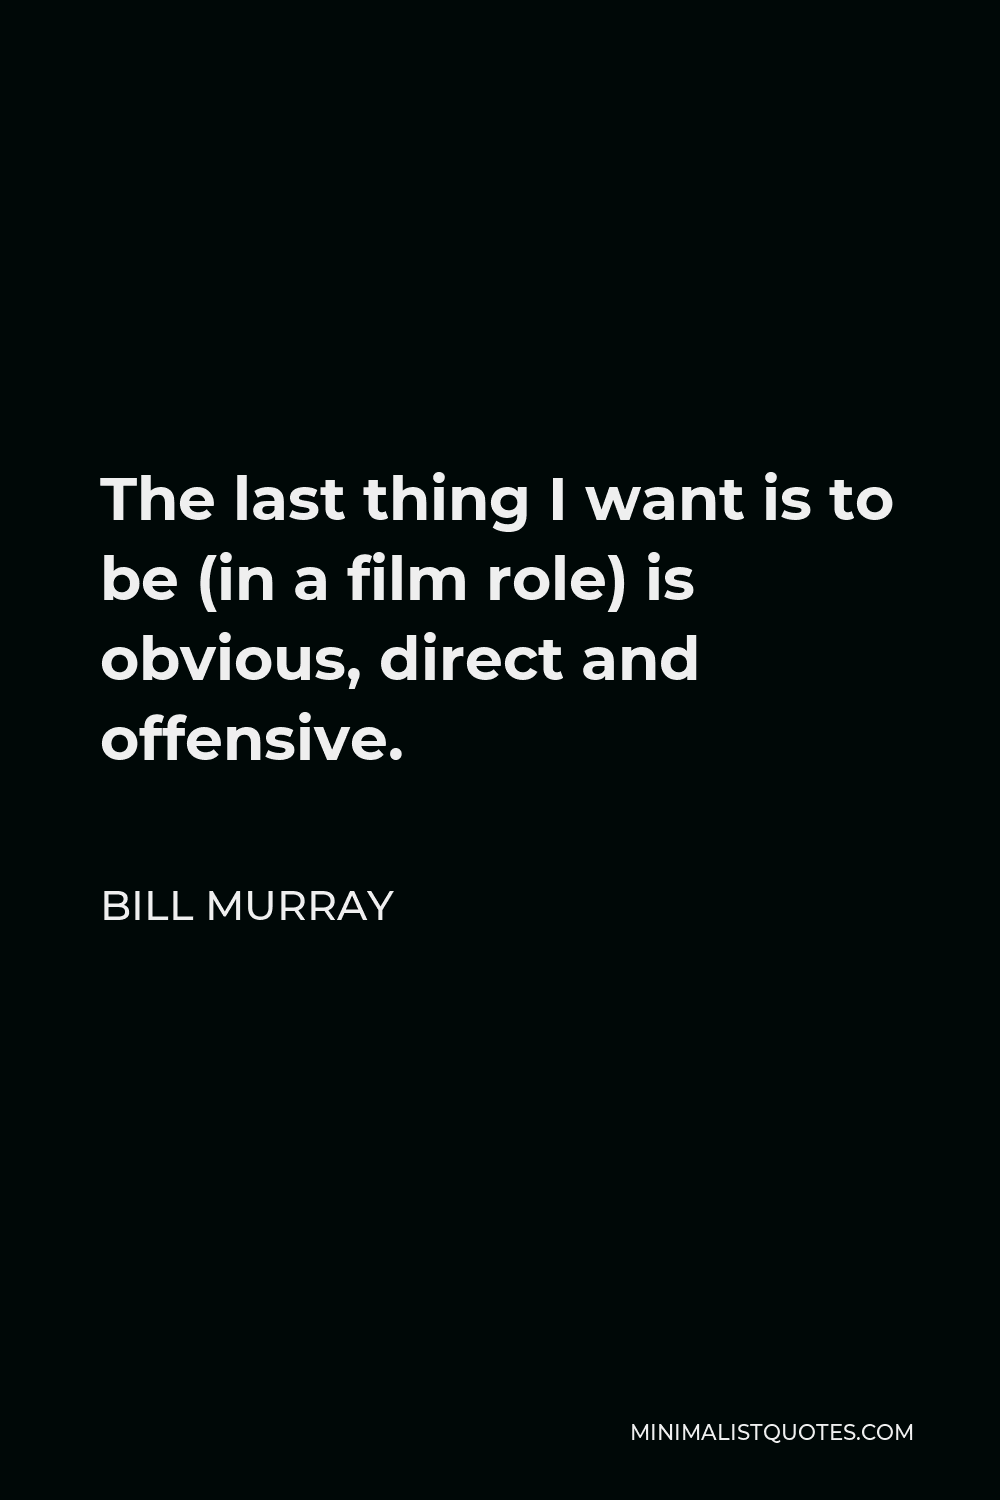 Bill Murray Quote - The last thing I want is to be (in a film role) is obvious, direct and offensive.